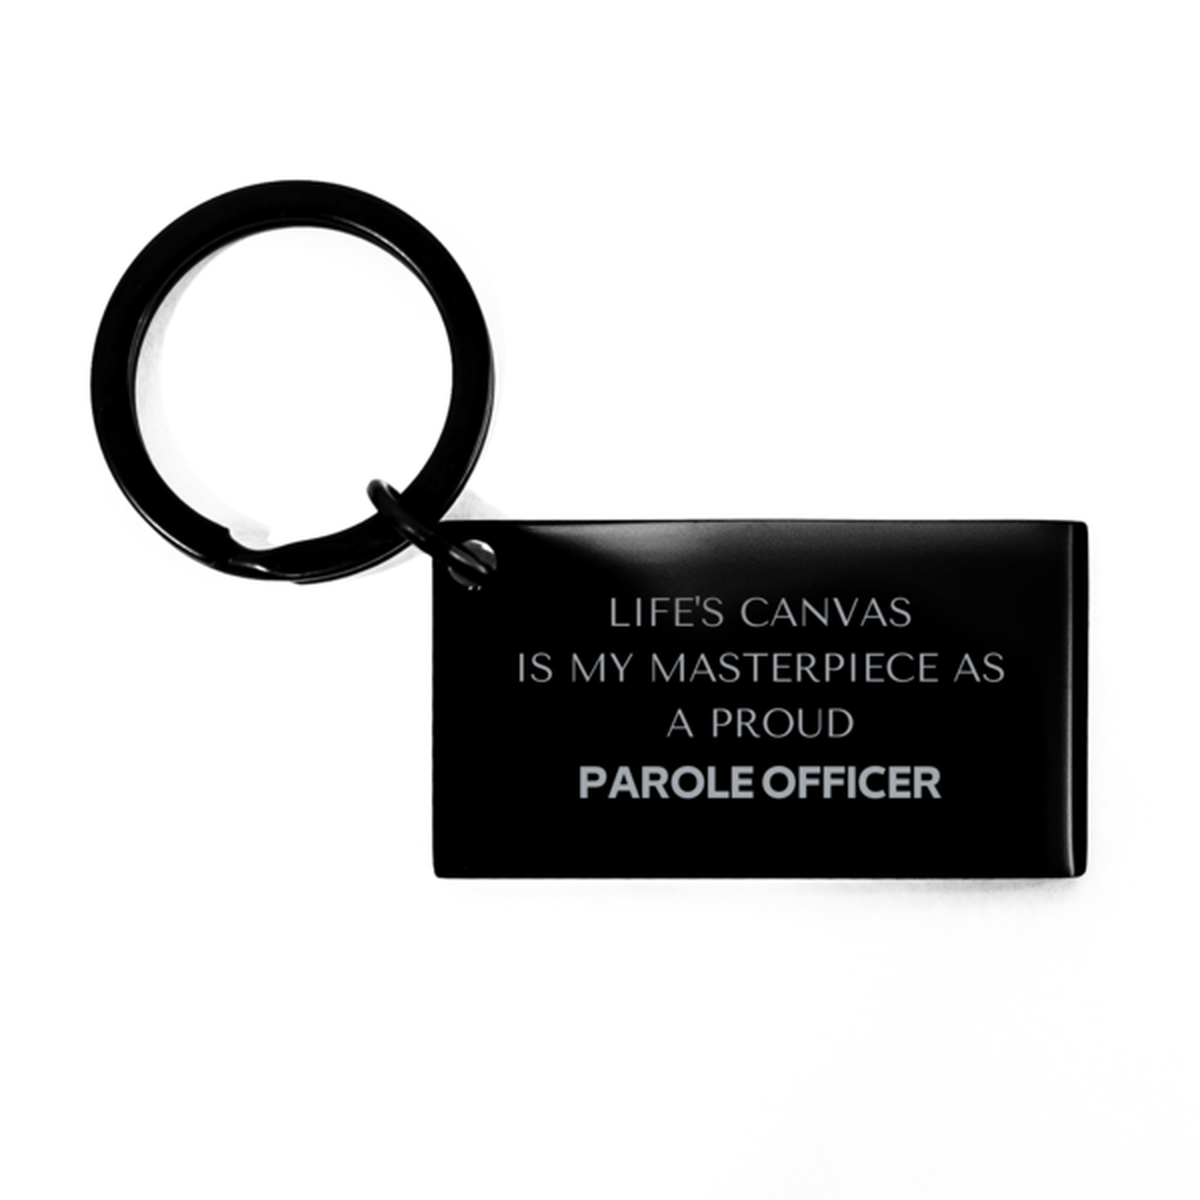 Proud Parole Officer Gifts, Life's canvas is my masterpiece, Epic Birthday Christmas Unique Keychain For Parole Officer, Coworkers, Men, Women, Friends